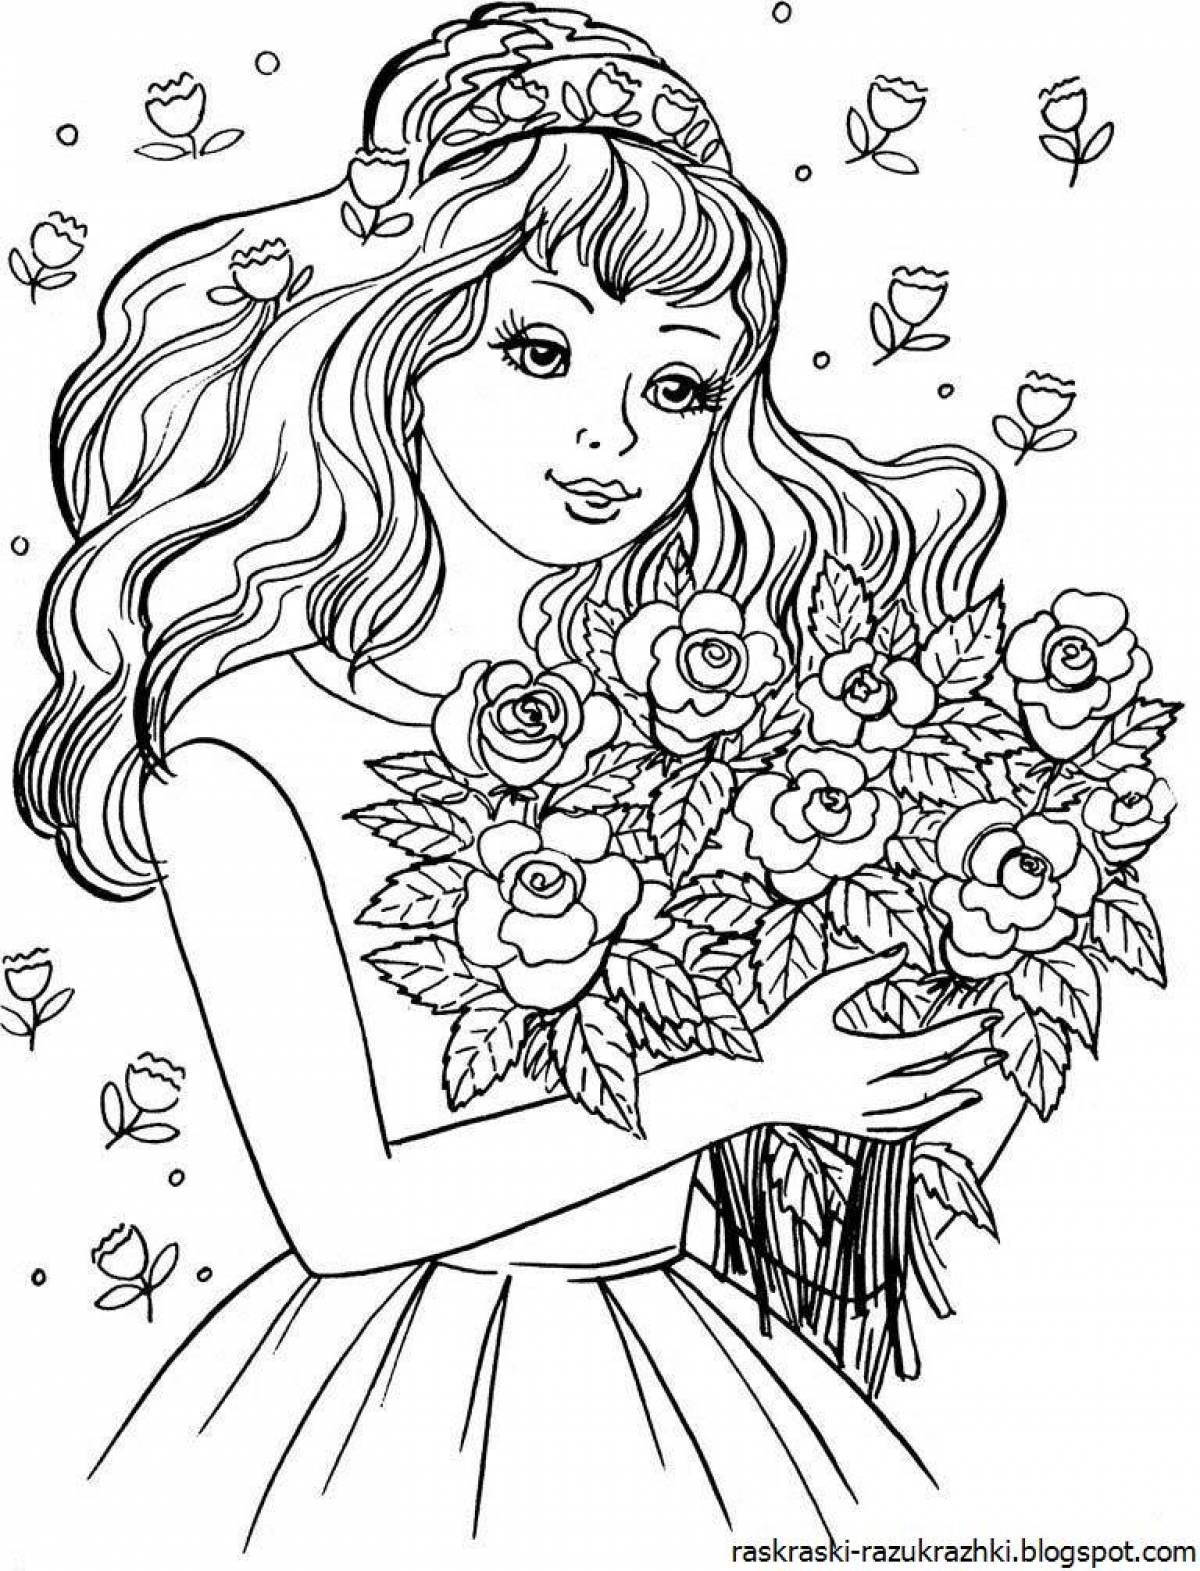 Coloring pages new 2020: wonderful and charming